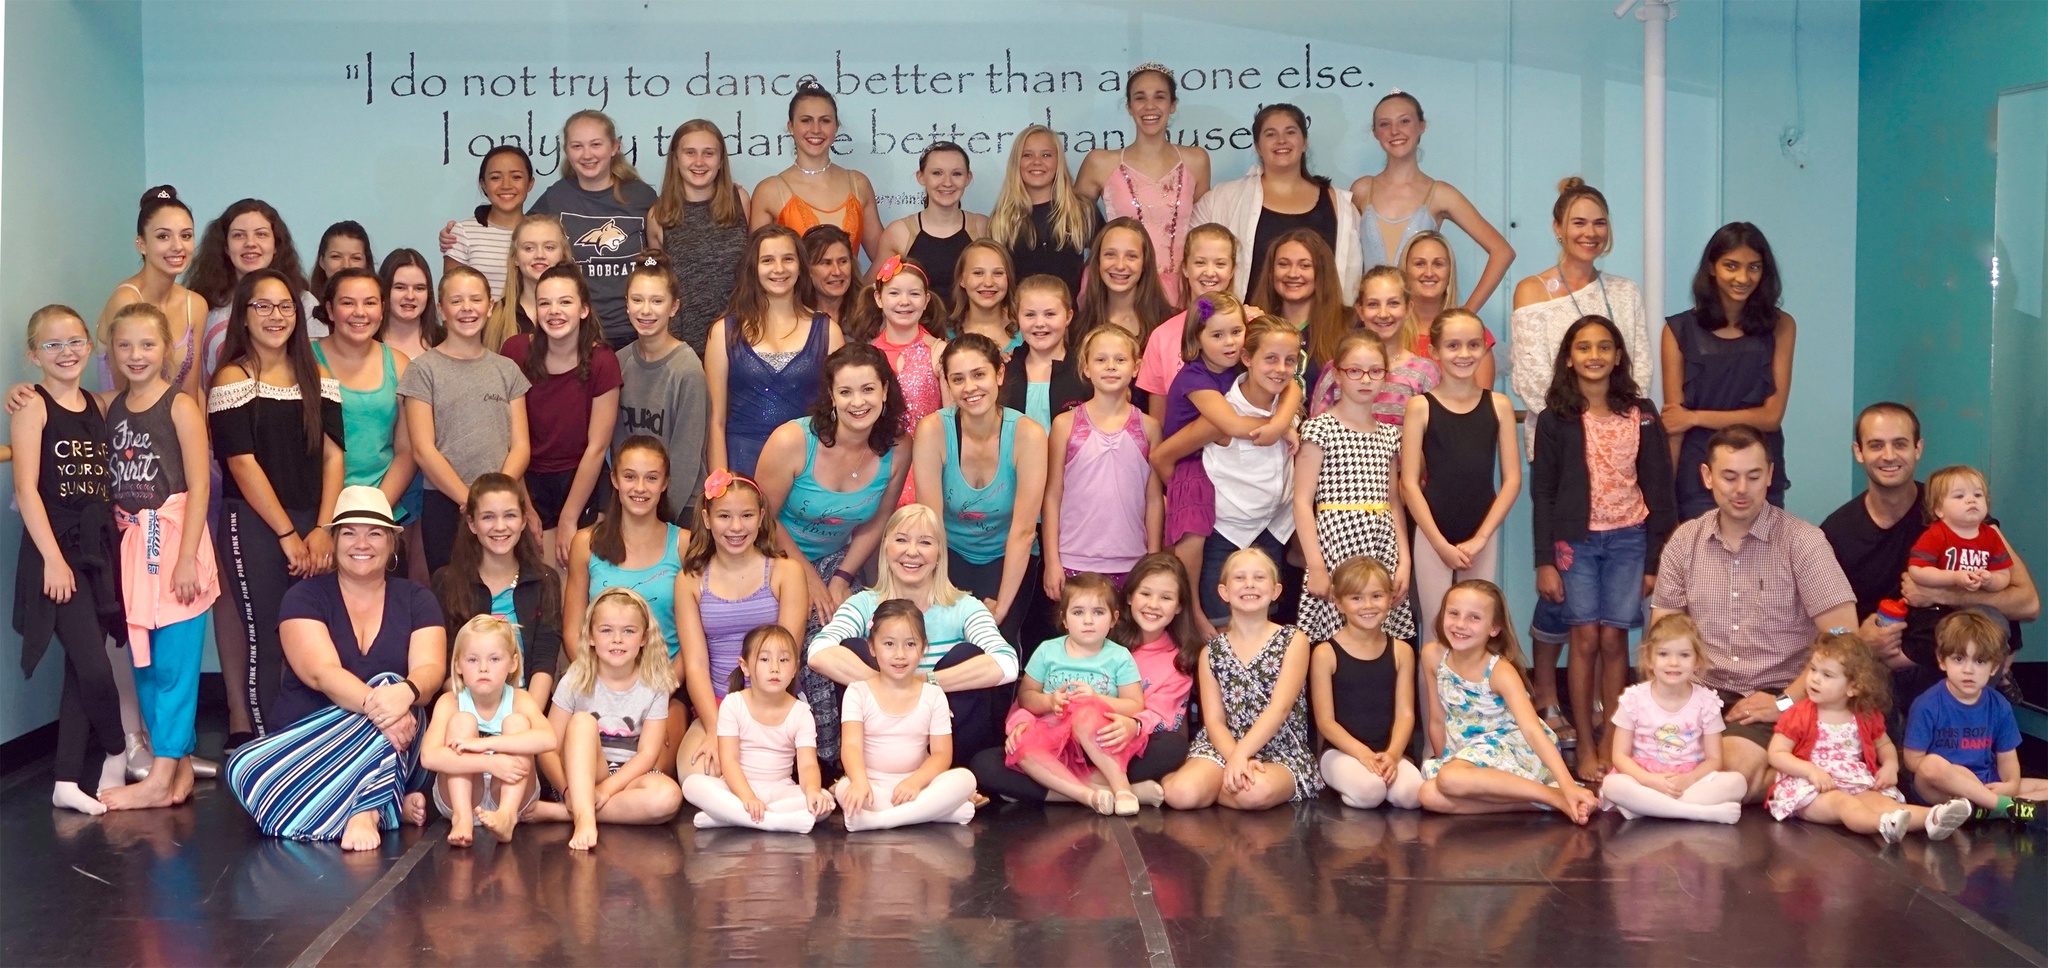 Cascade Dance Academy students and staff celebrated the studio’s move to a new location in the Snoqualmie Ridge Business Park at an open house event Sept. 10.Courtesy Photo